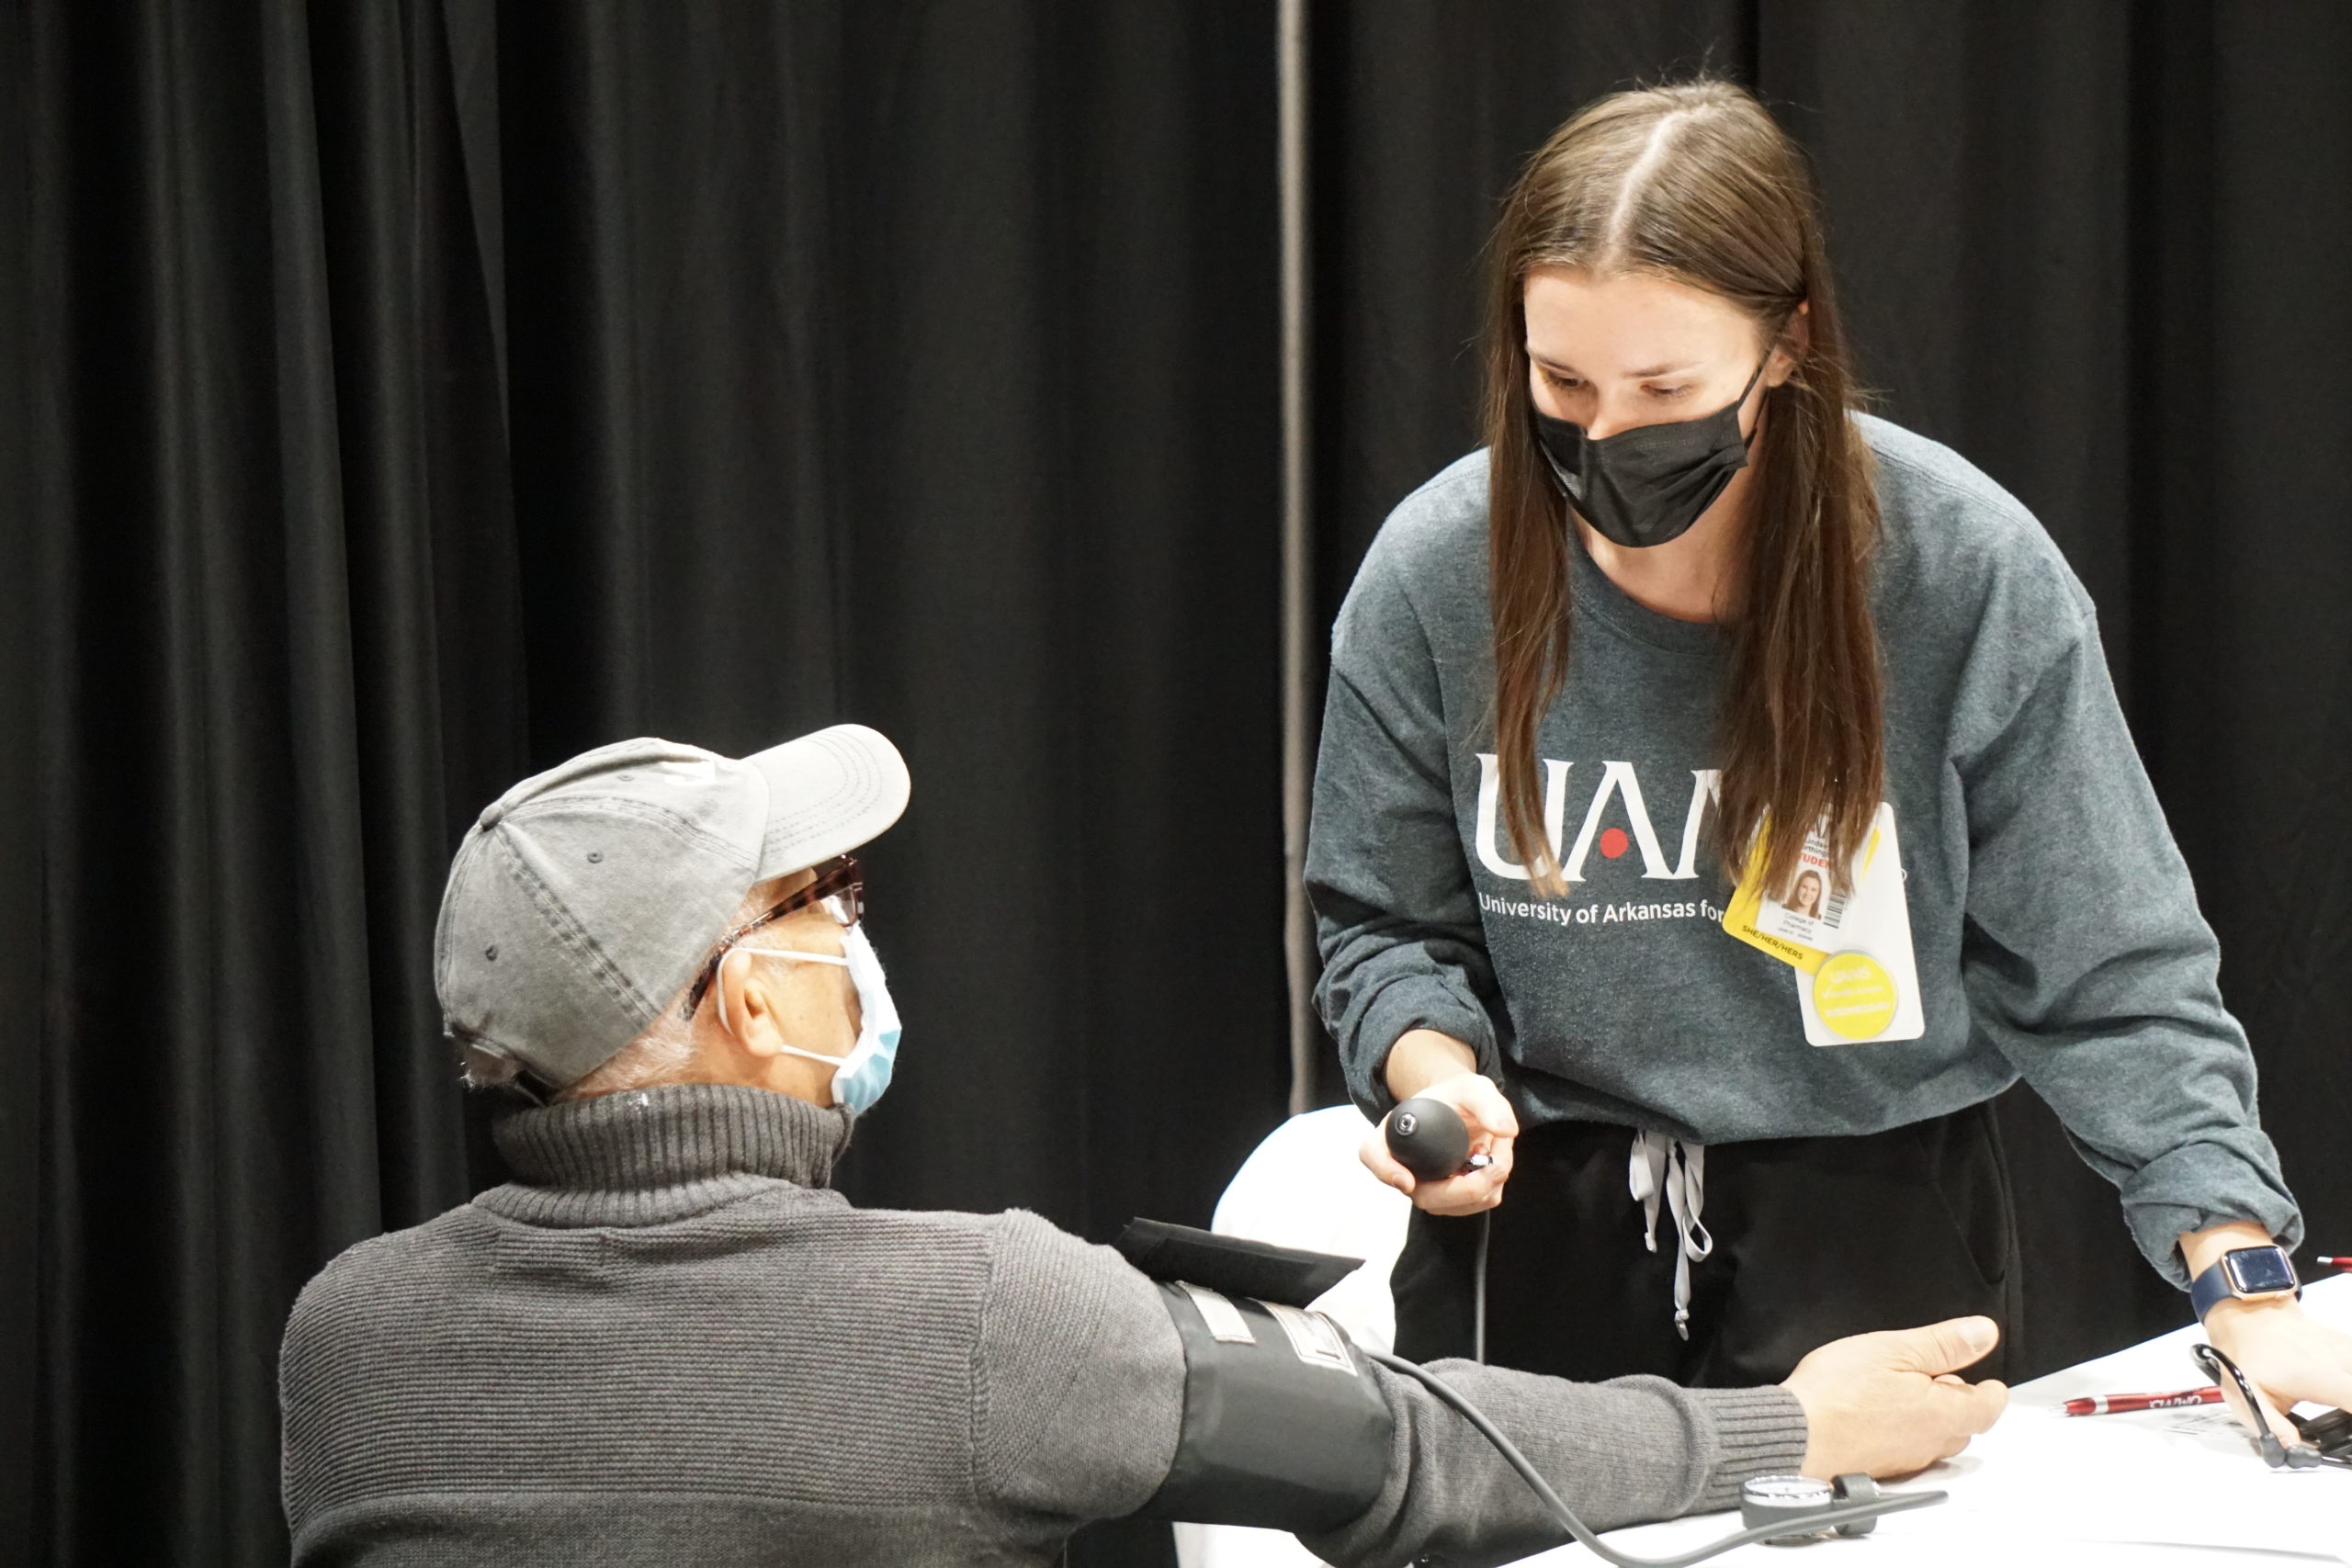 UAMS staff conducts a blood pressure test